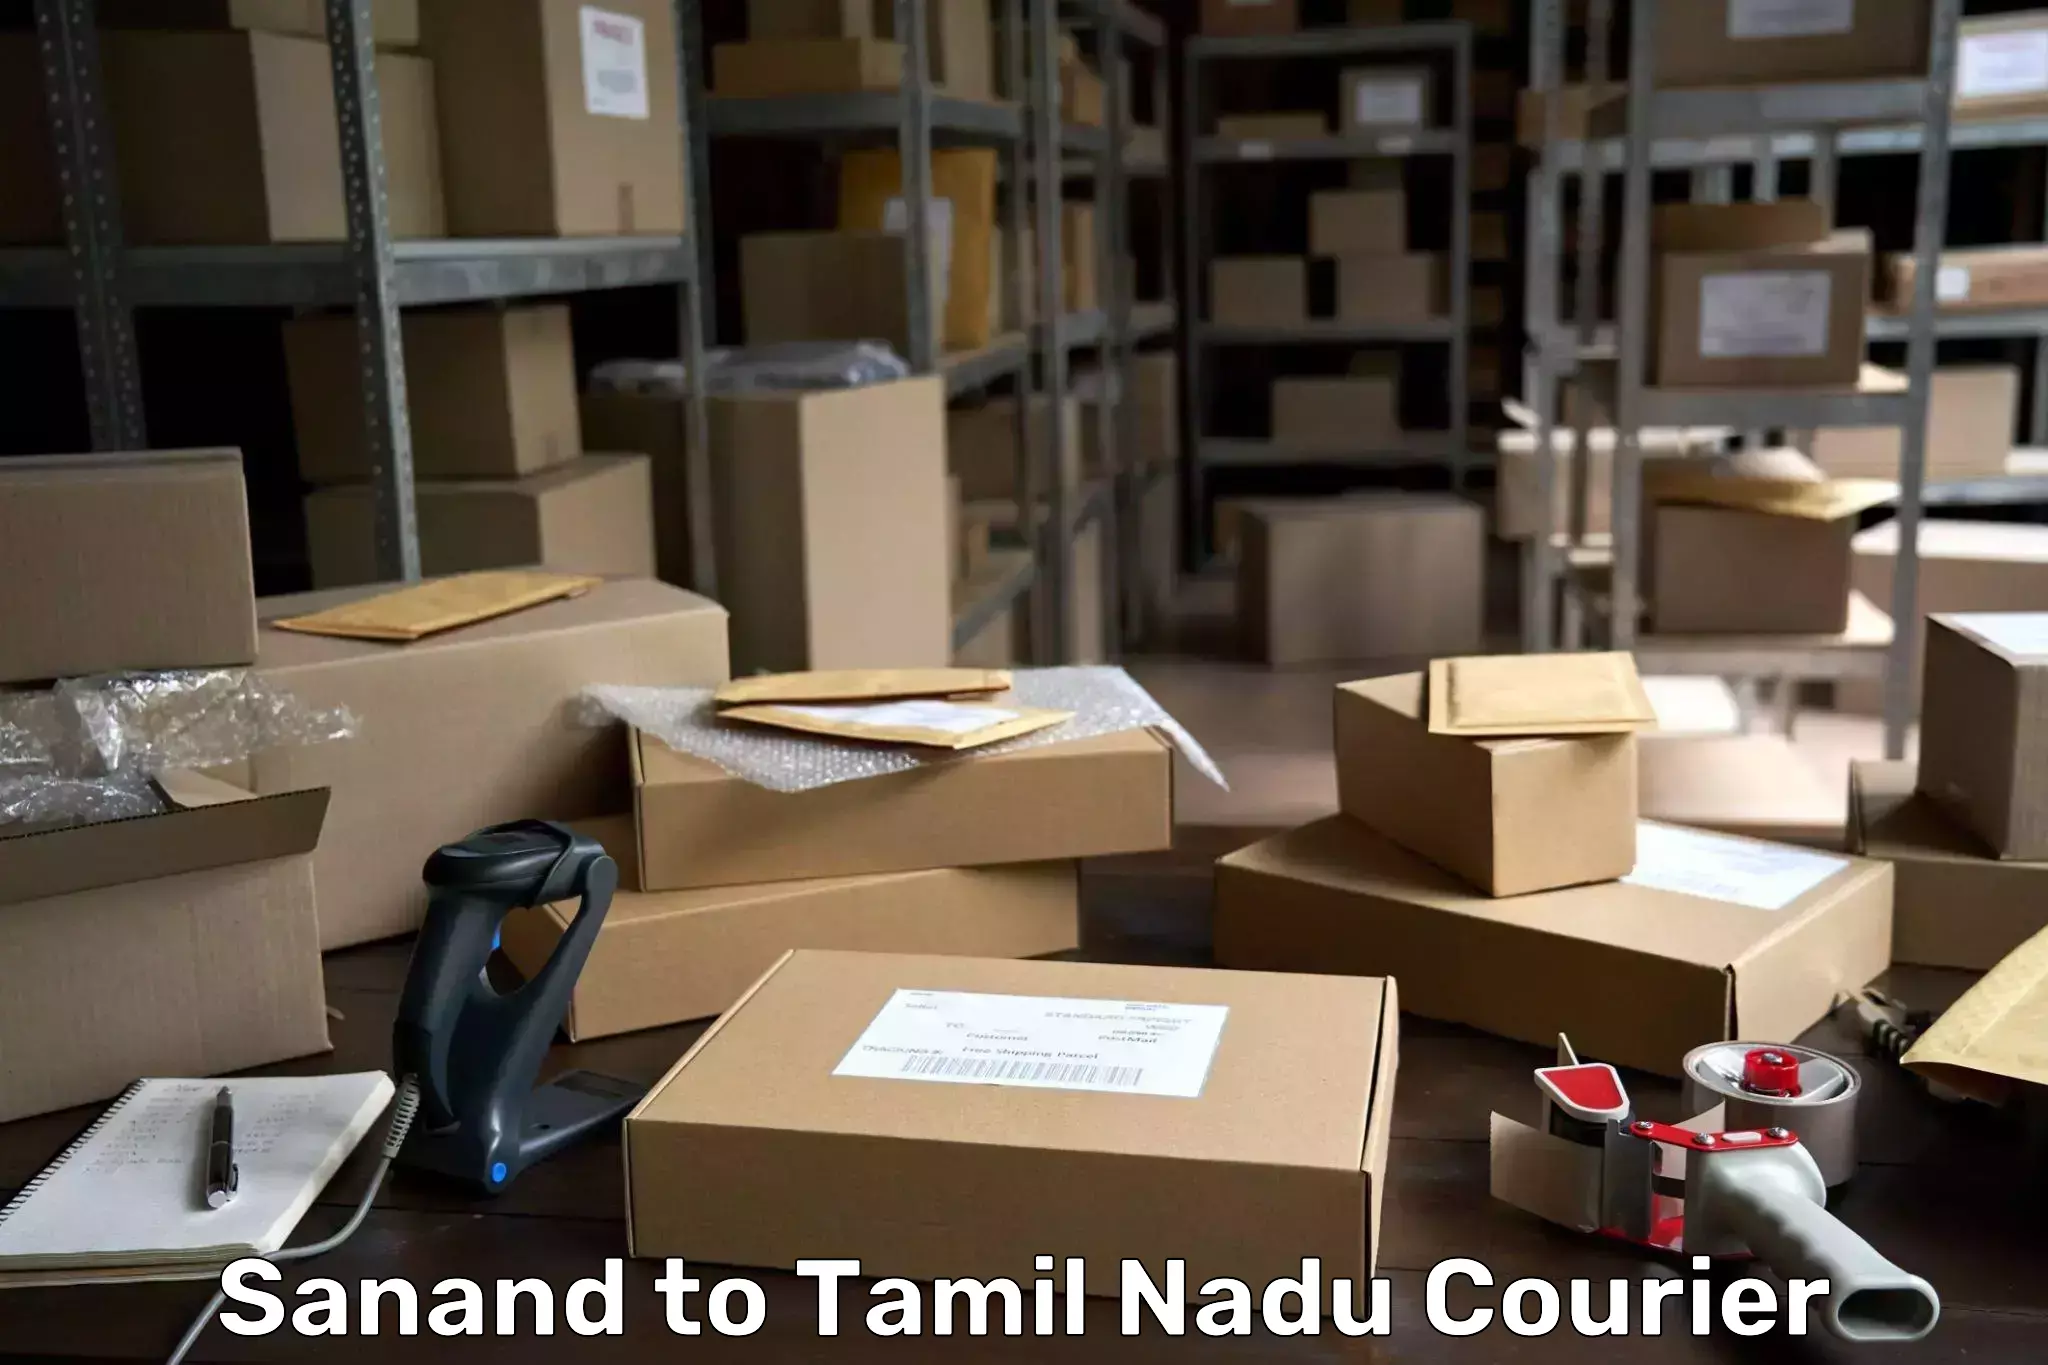 Reliable courier service Sanand to Chennai Port